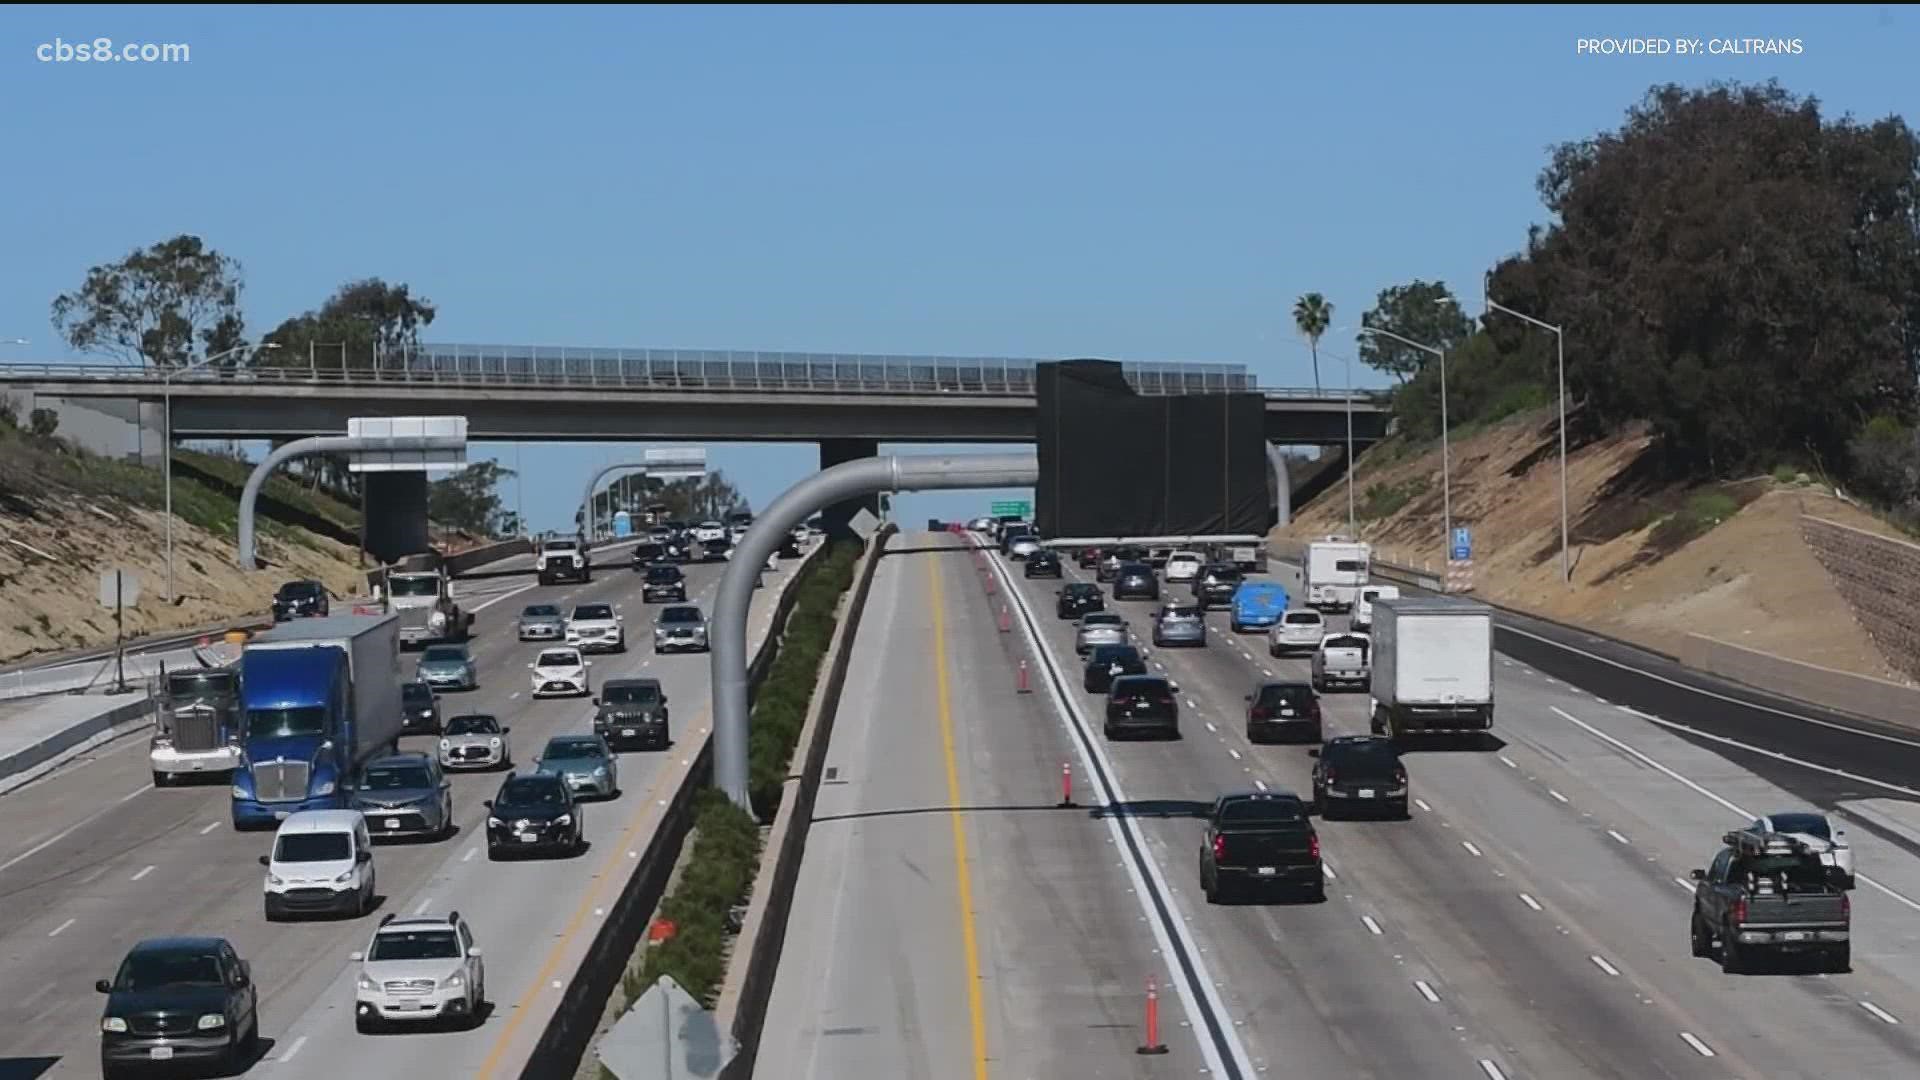 Caltrans said the new carpool/HOV lanes will improve connectivity and provide more transportation choices in North County.